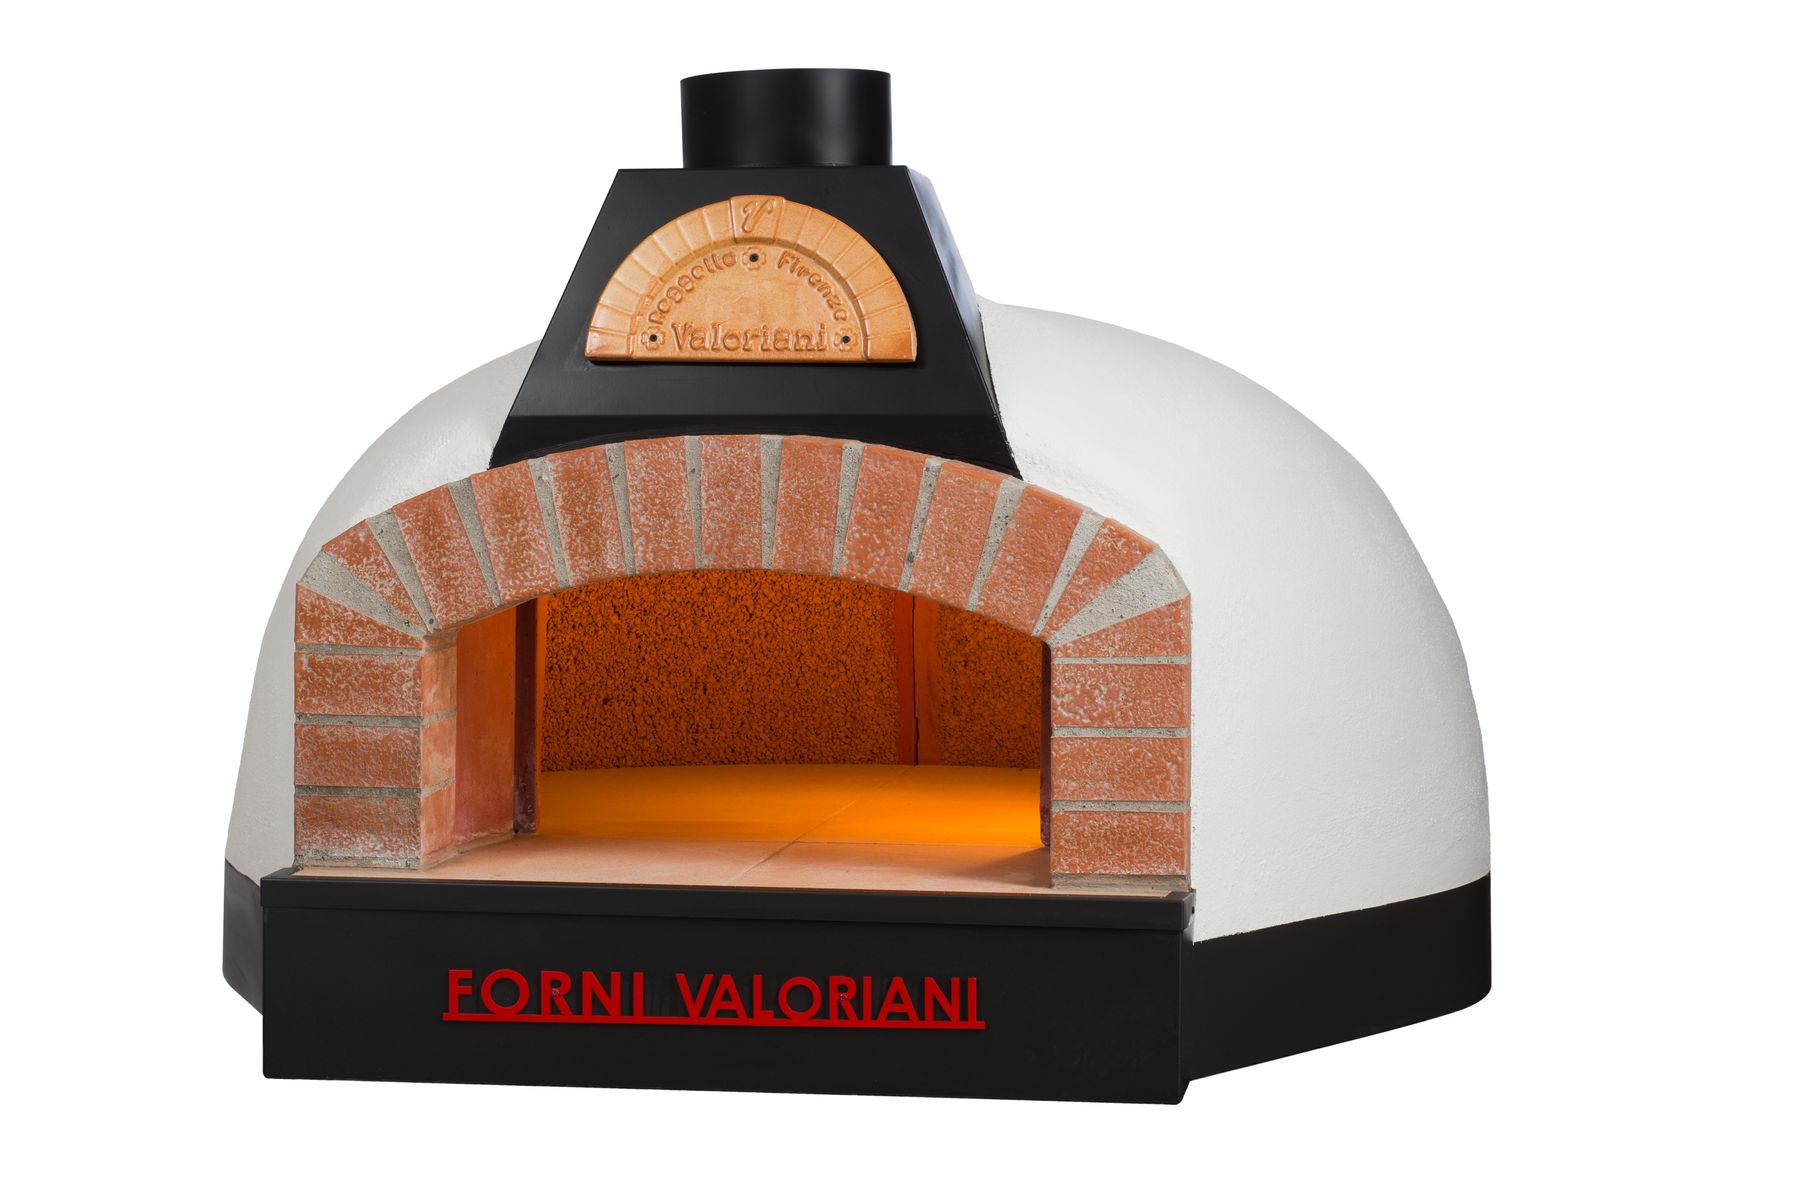 A wood-fired restaurant grade, commercial Vesuvio Igloo oven from Valoriani UK